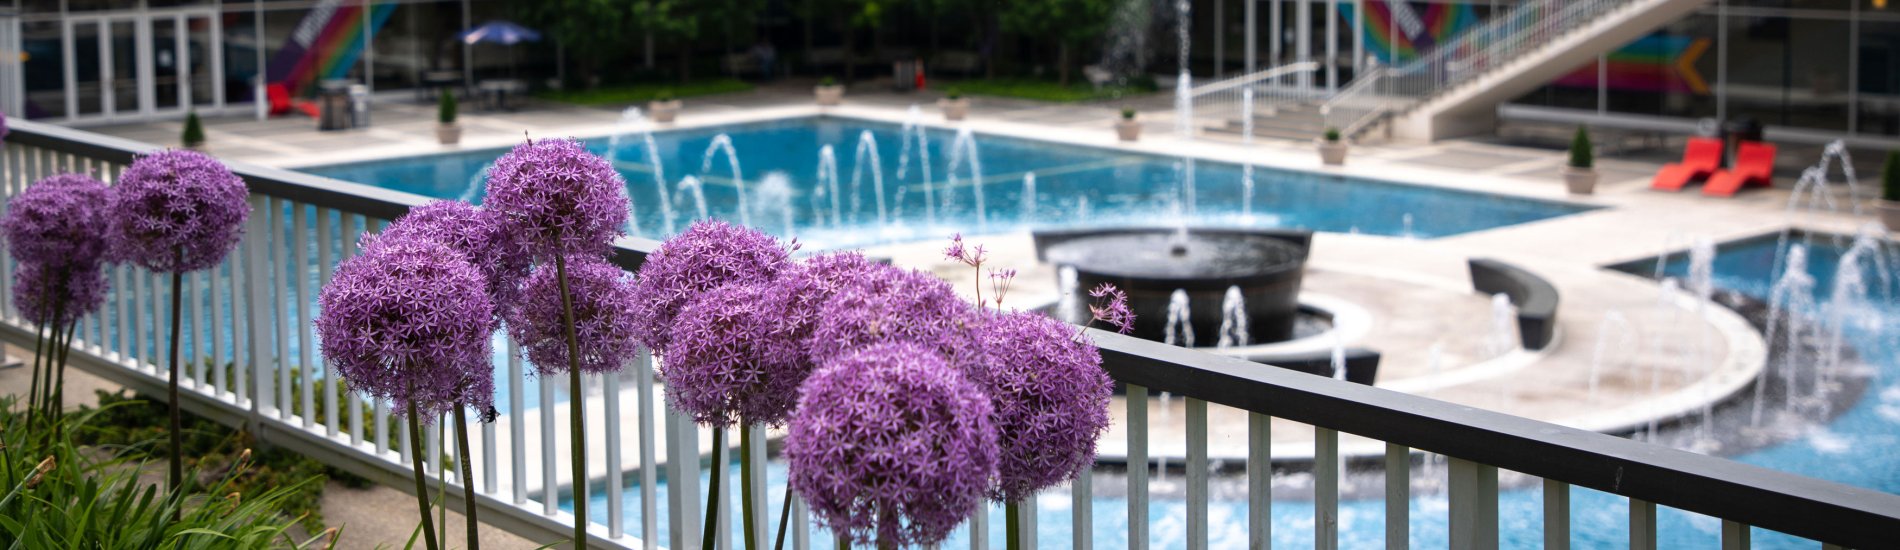 Round purple flowers in the foreground, with the Academic Podium blue pool and fountain in the background.